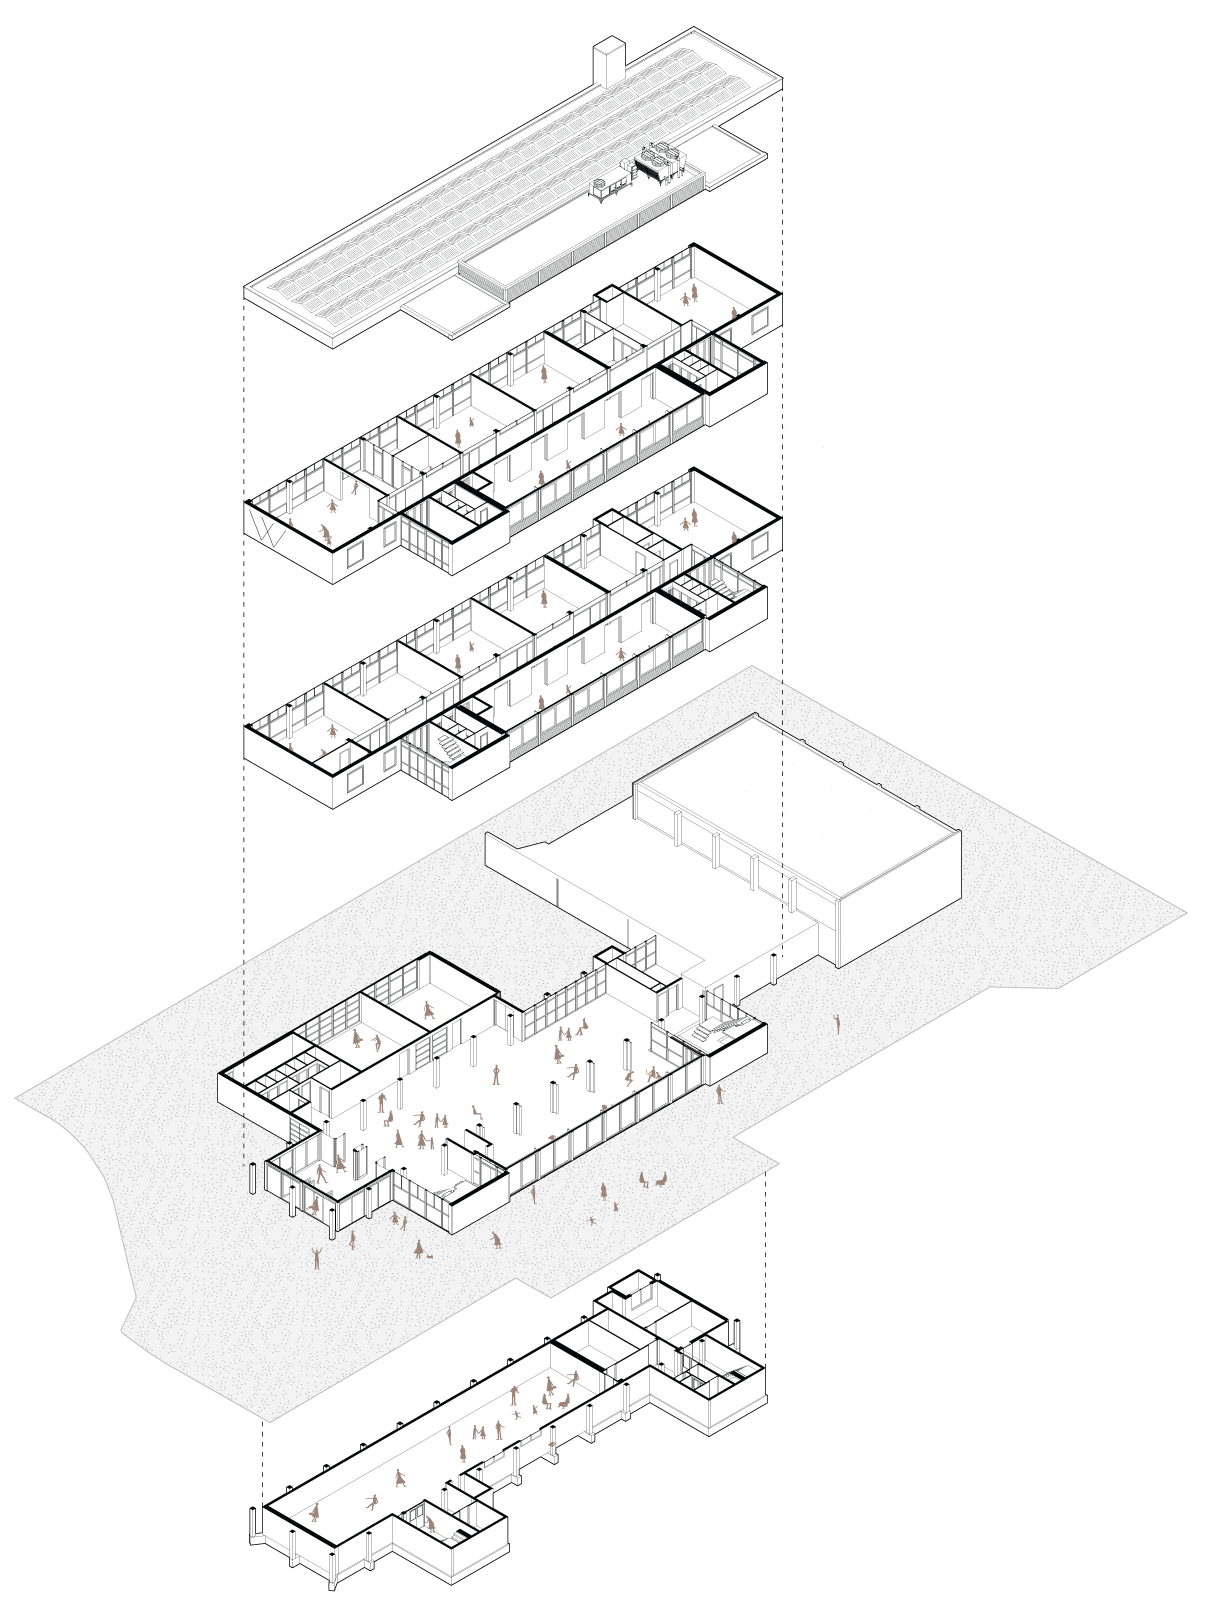 exploded isometric illustration of station wildeman project showing layout of every floor by beta architect amsterdam evert klinkenberg gus auguste van oppen